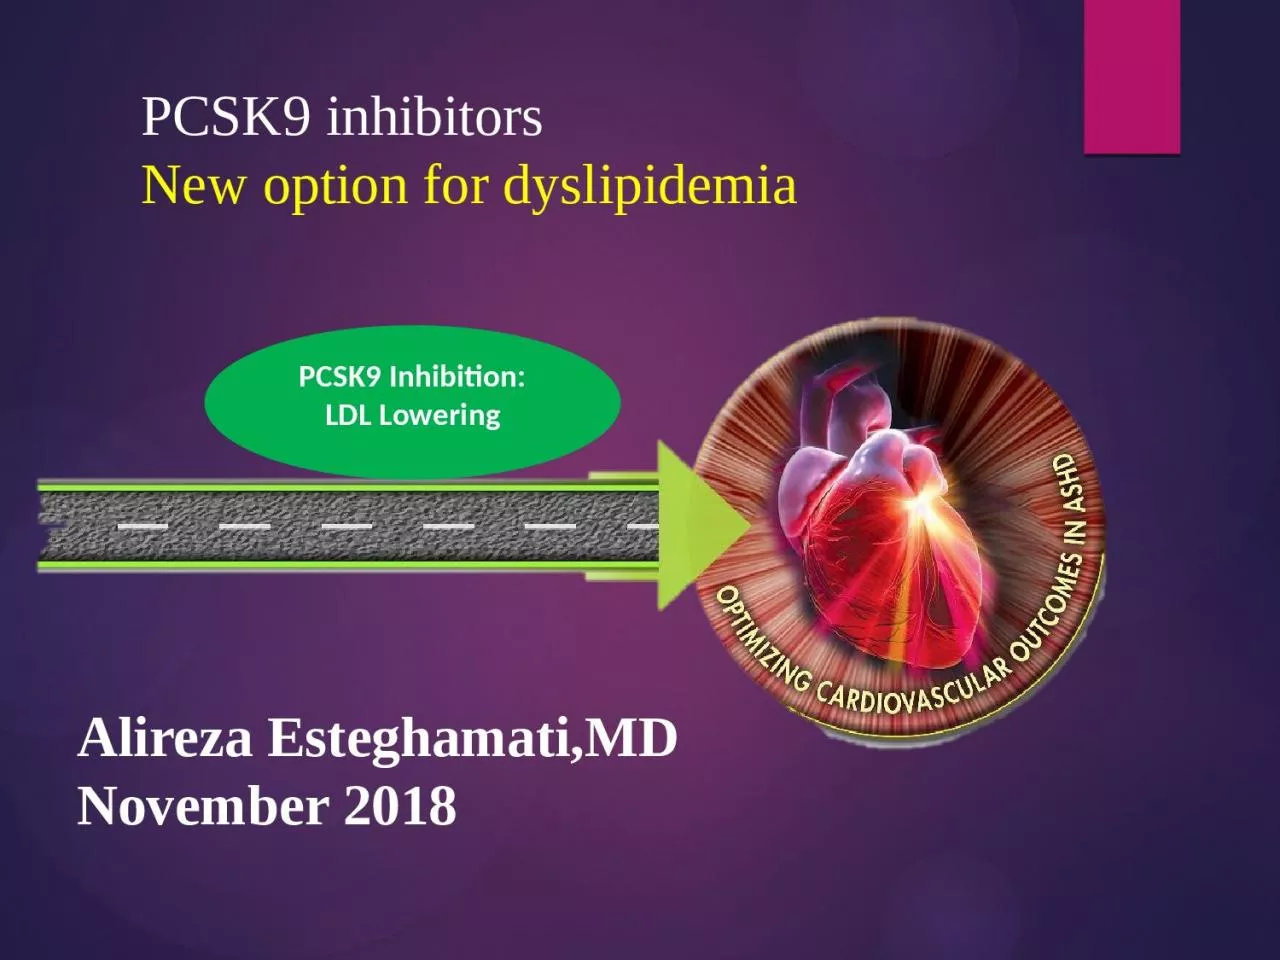 PCSK9 Inhibition: LDL Lowering